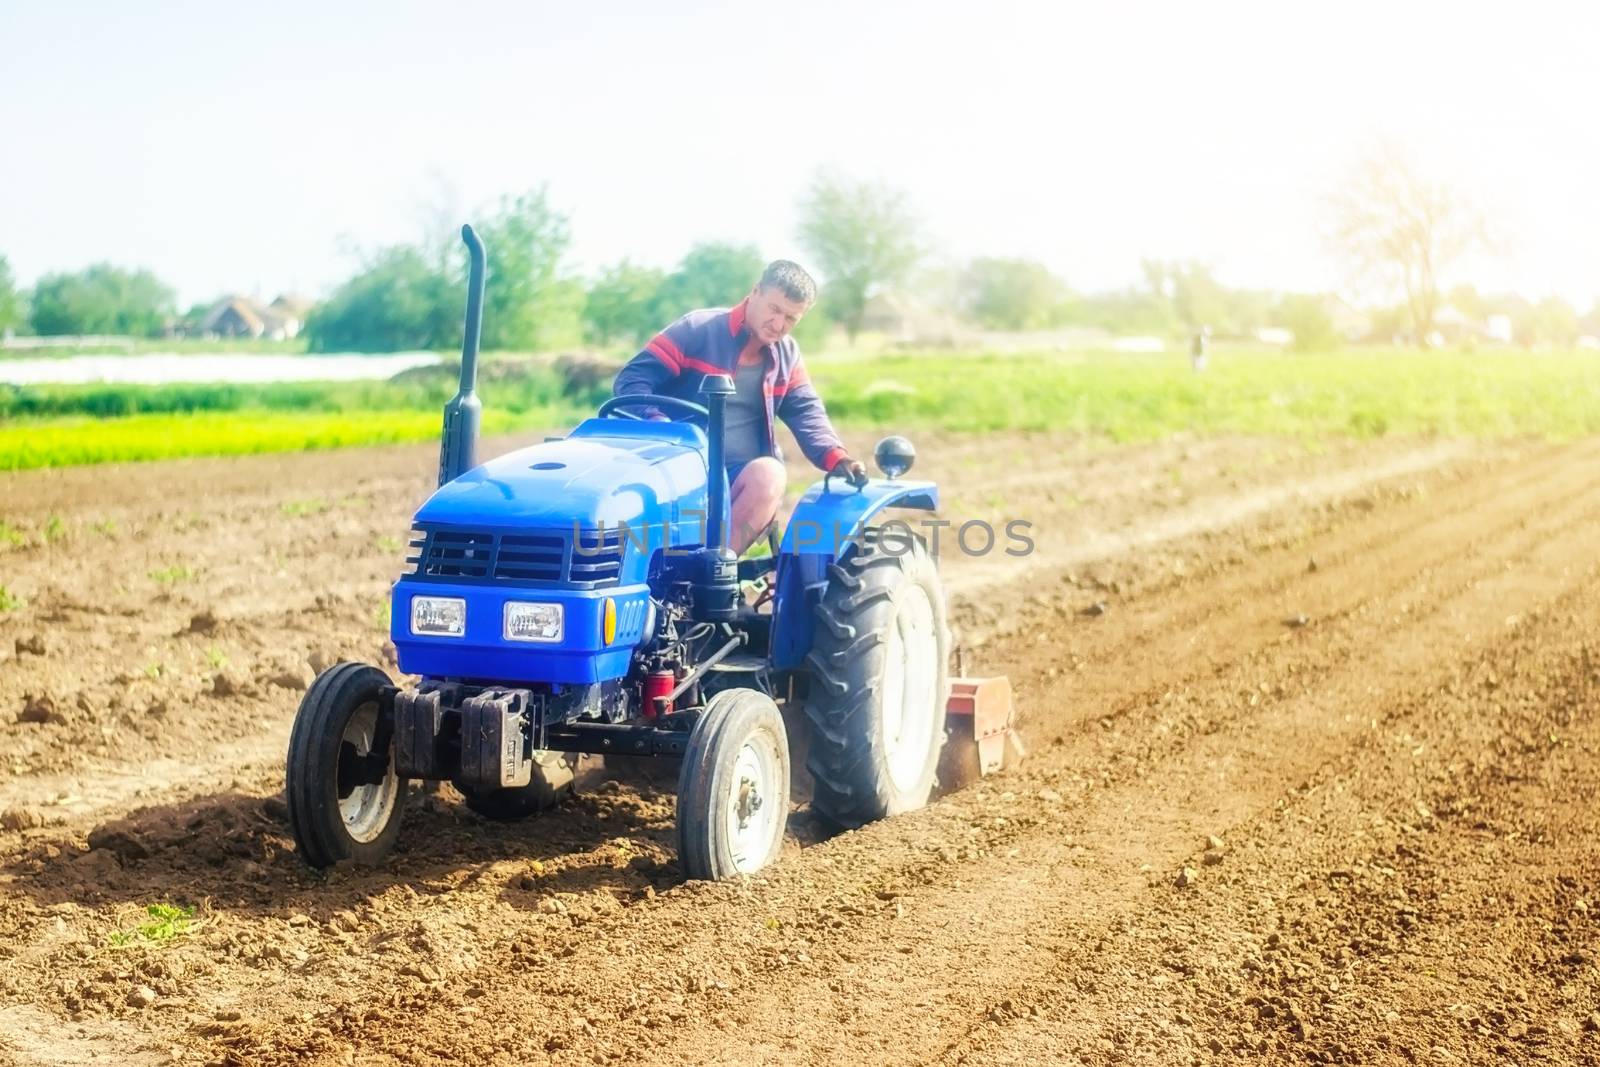 A farmer on a tractor cultivates a farm field. Agriculture, growing organic food vegetables. Soil milling, crumbling and mixing. Loosening the surface, cultivating the land for further planting. by iLixe48